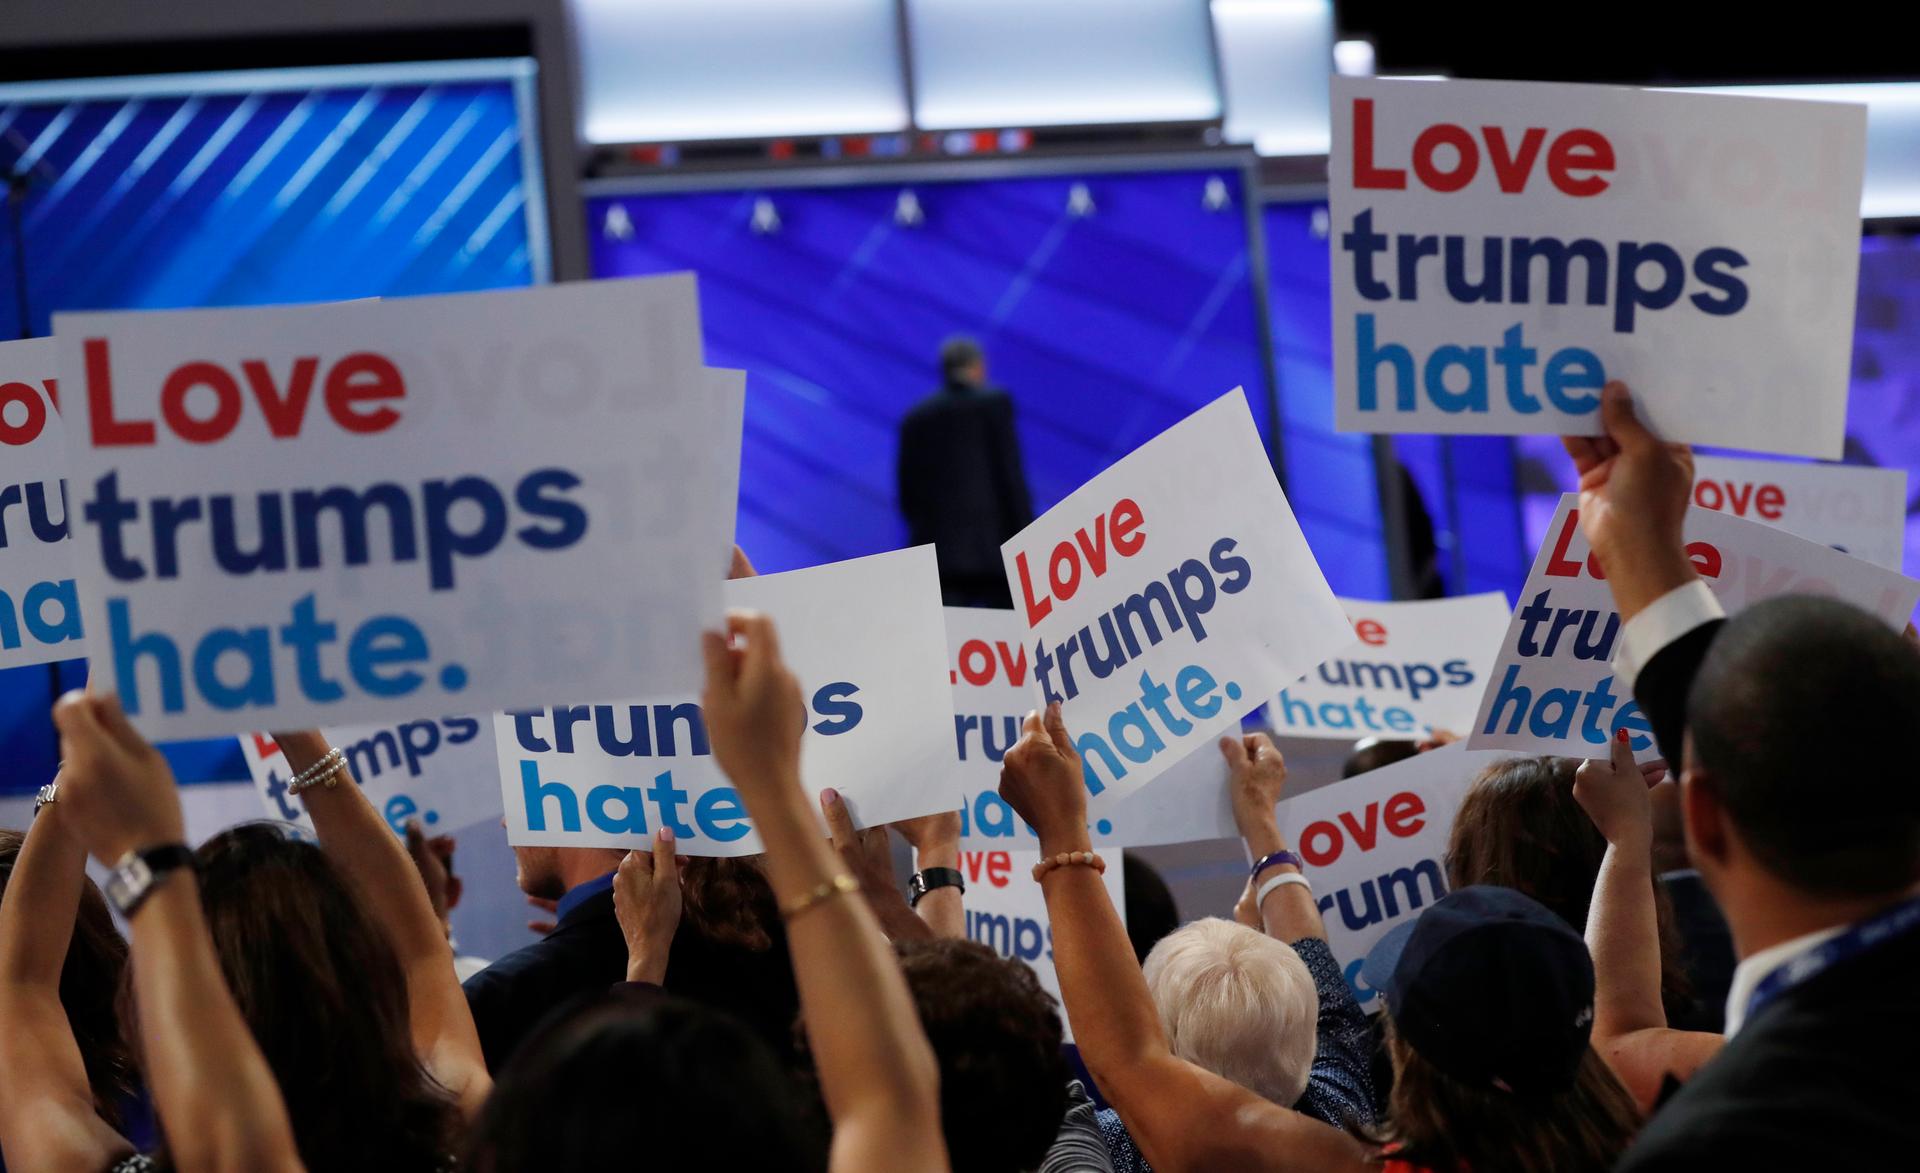 A scene from the Democratic National Convention in Philadelphia in July 2016.